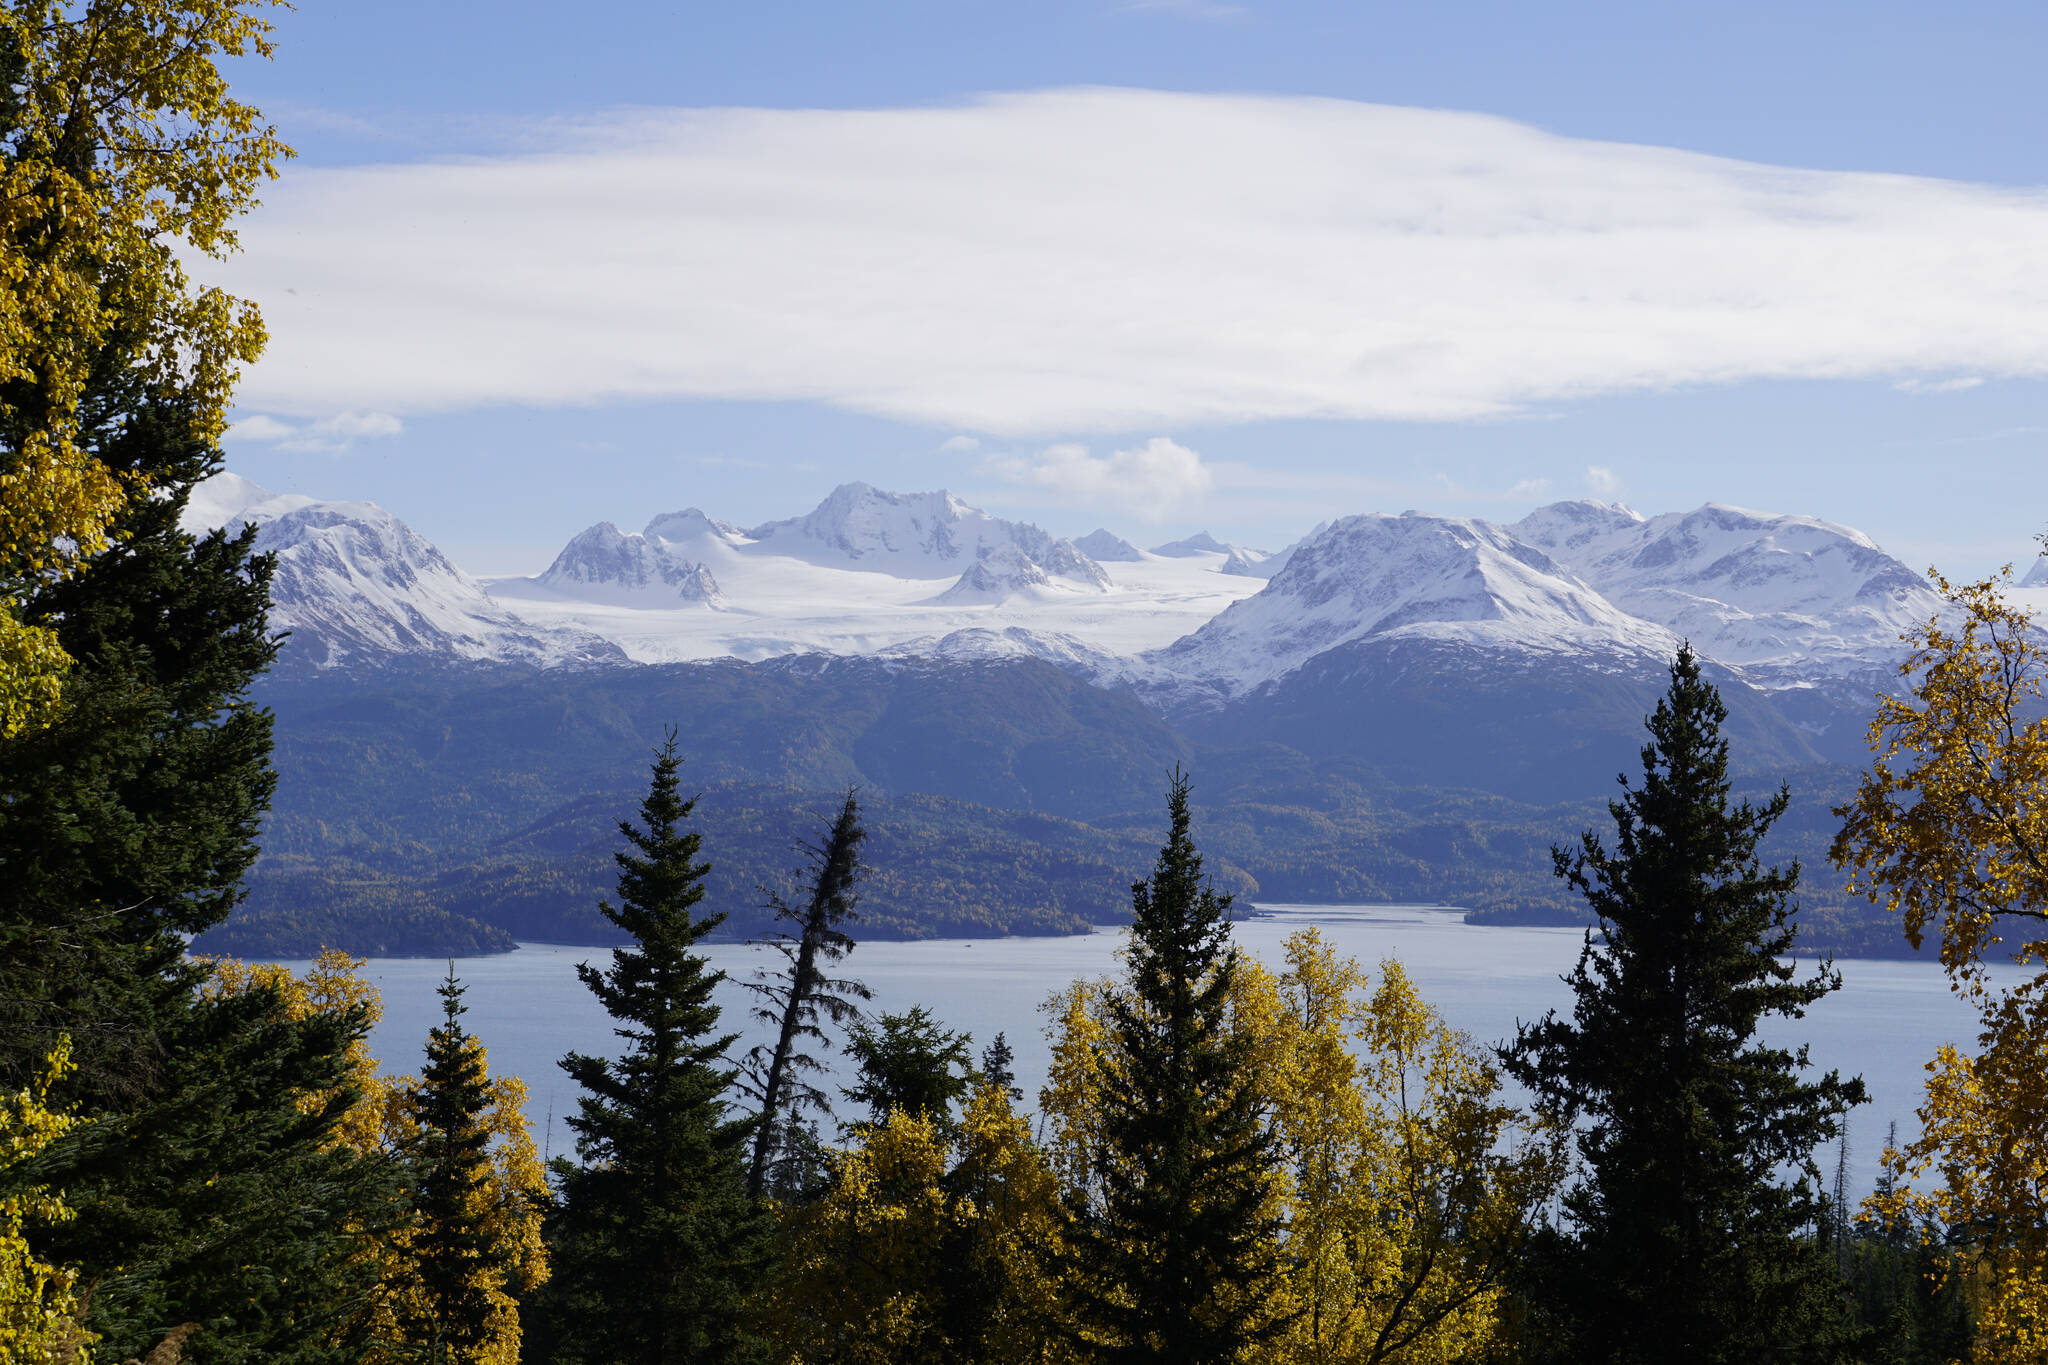 Golden-yellow birch trees and spruce frame a view of Aurora Lagoon and Portlock Glacier from a trail in the Cottonwood-Eastland Unit of Kachemak Bay State Park off East End Road on Sunday, Oct. 3, 2021, near Homer, Alaska. (Photo by Michael Armstrong)